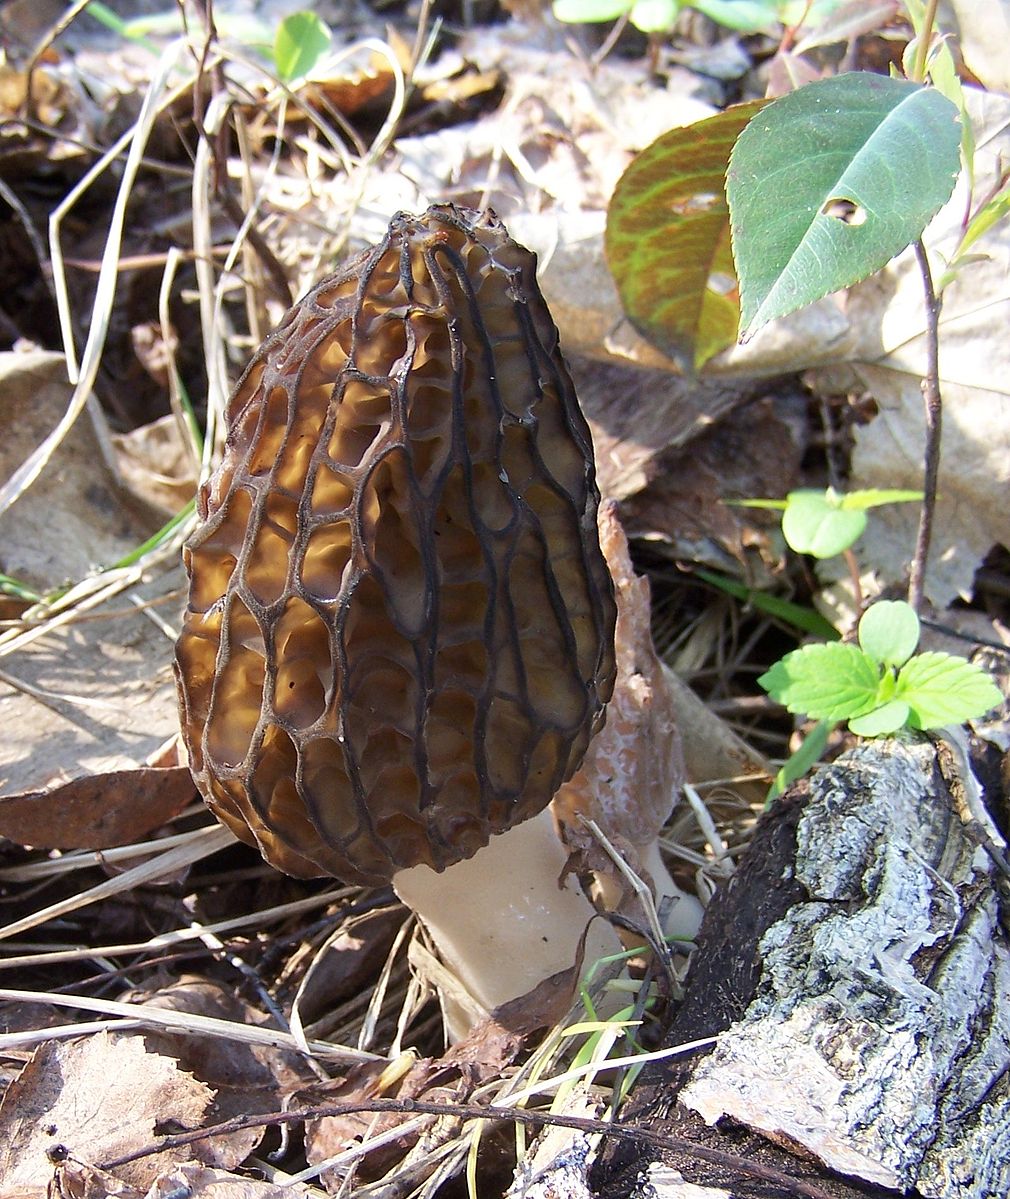 A mushroom that grows in a teardrop shape, it is brown and porous